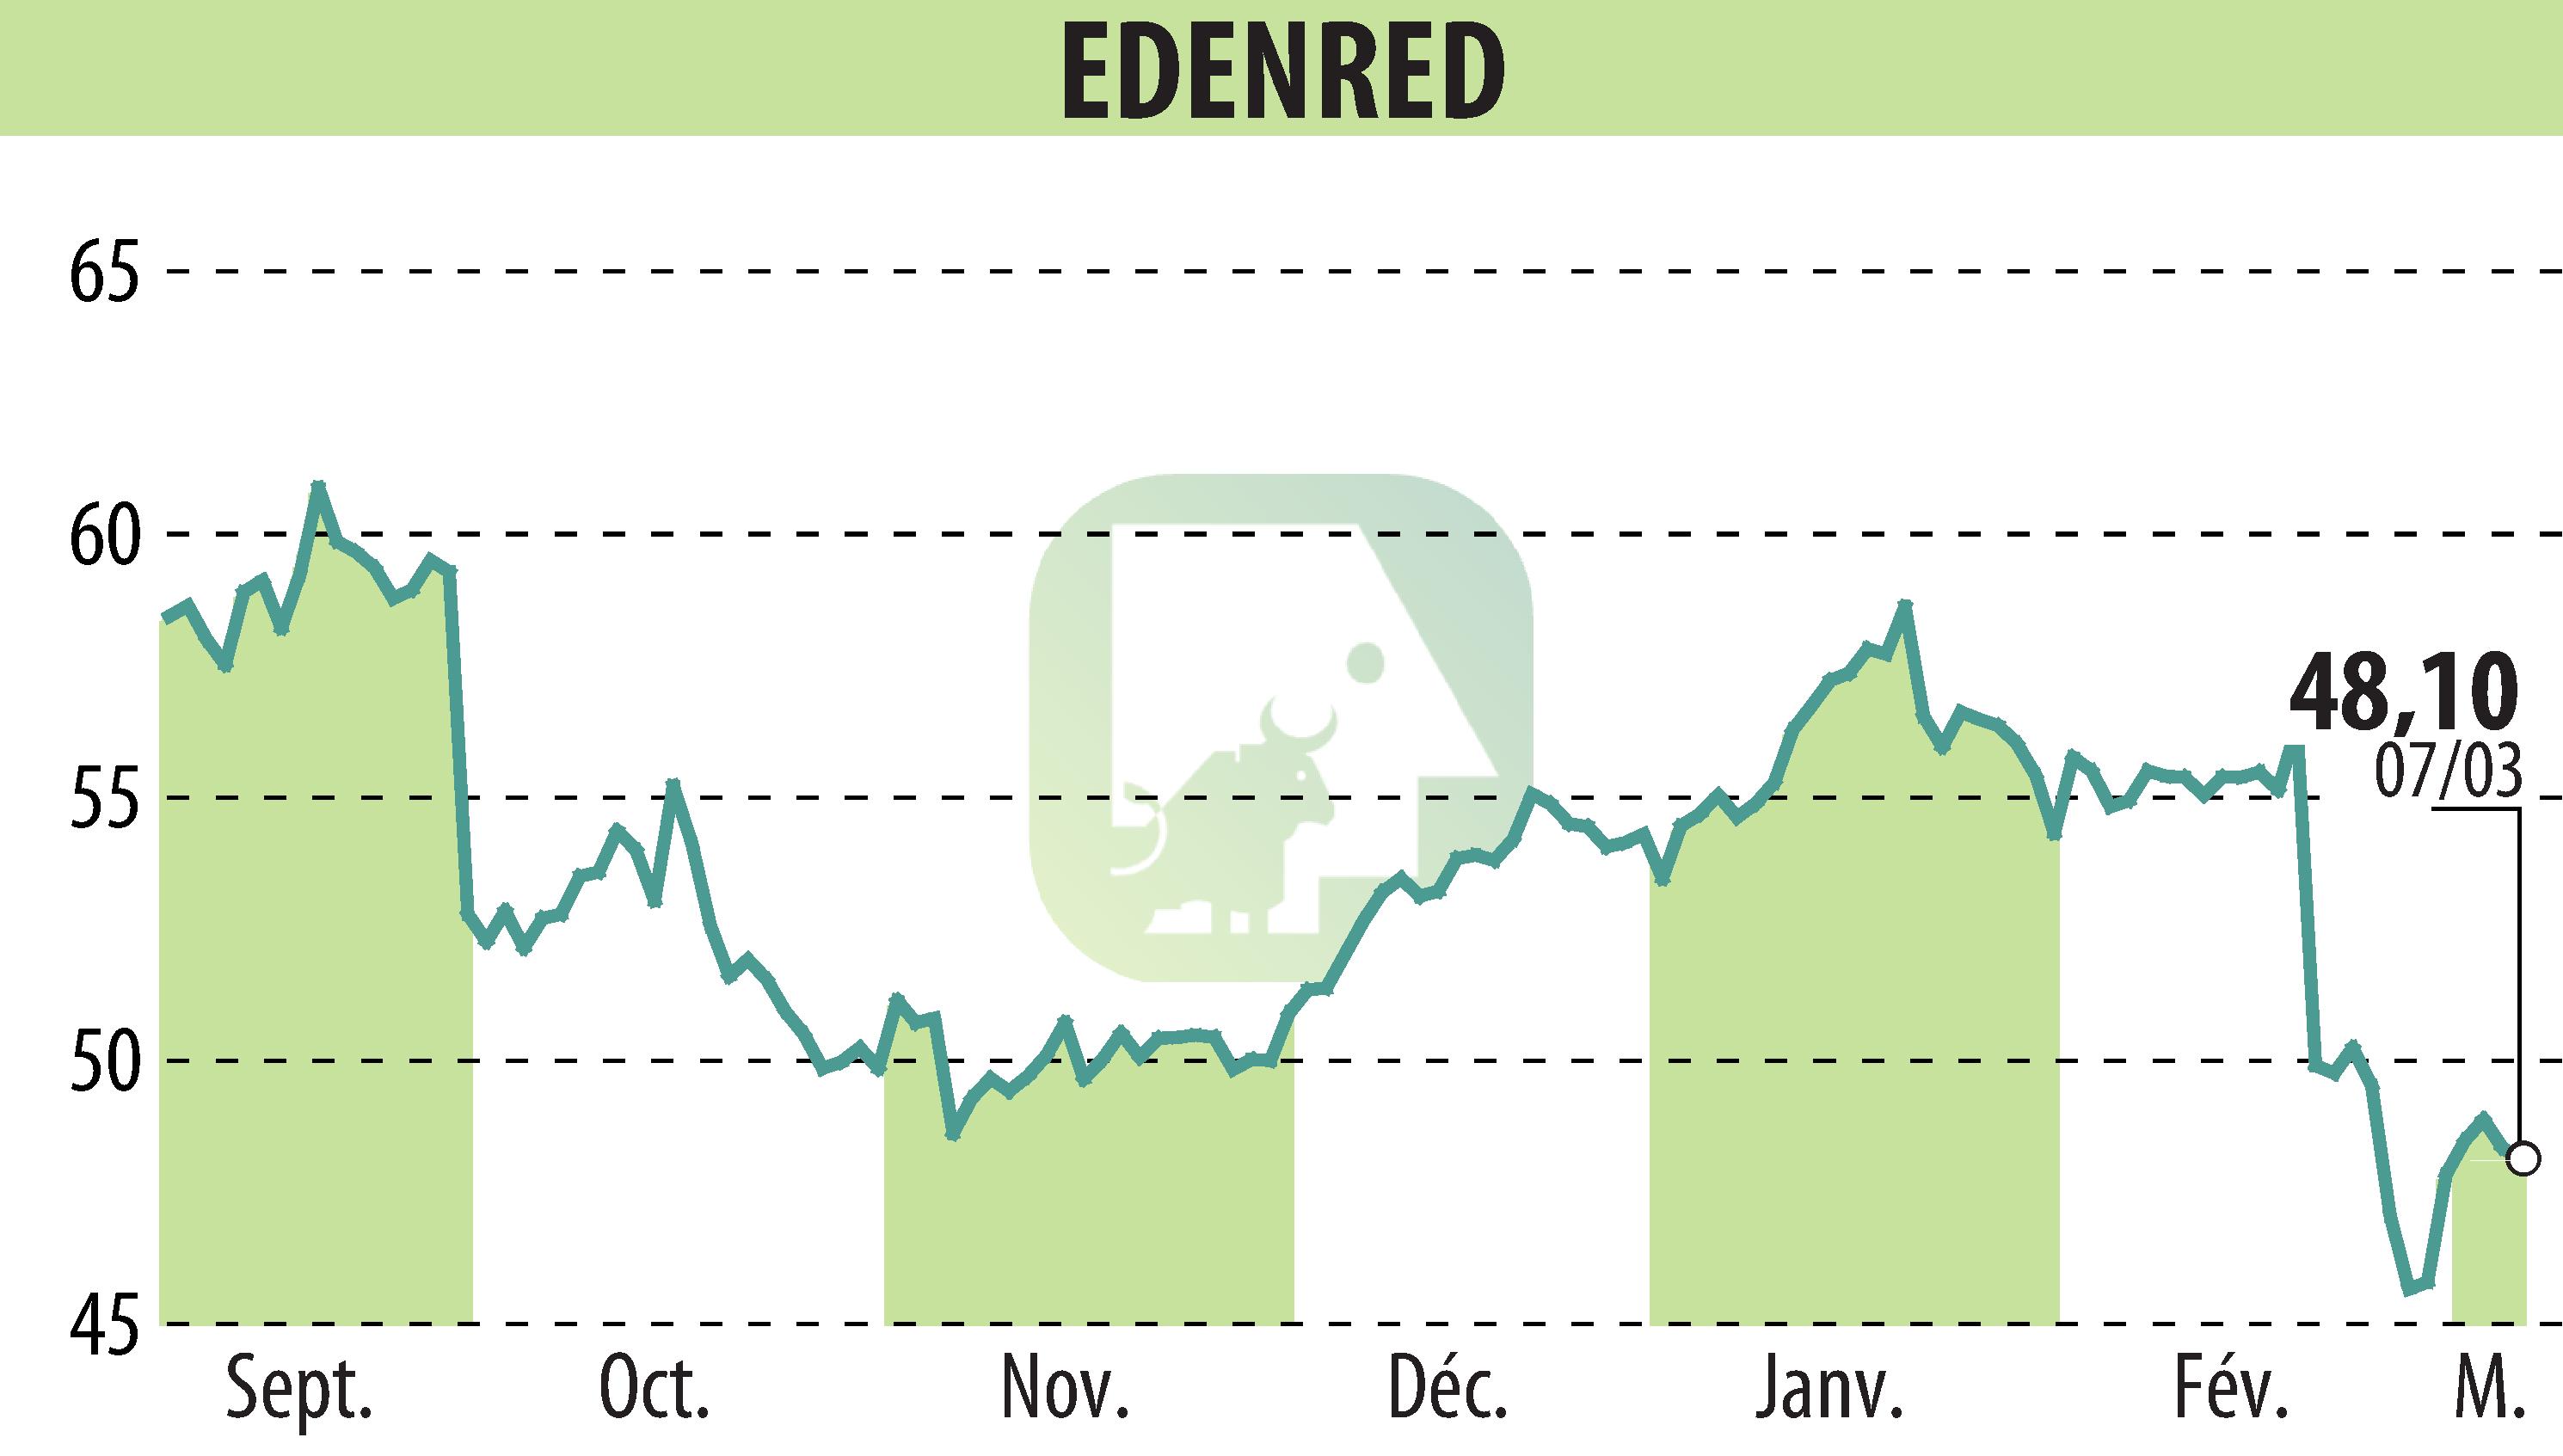 Stock price chart of EDENRED (EPA:EDEN) showing fluctuations.